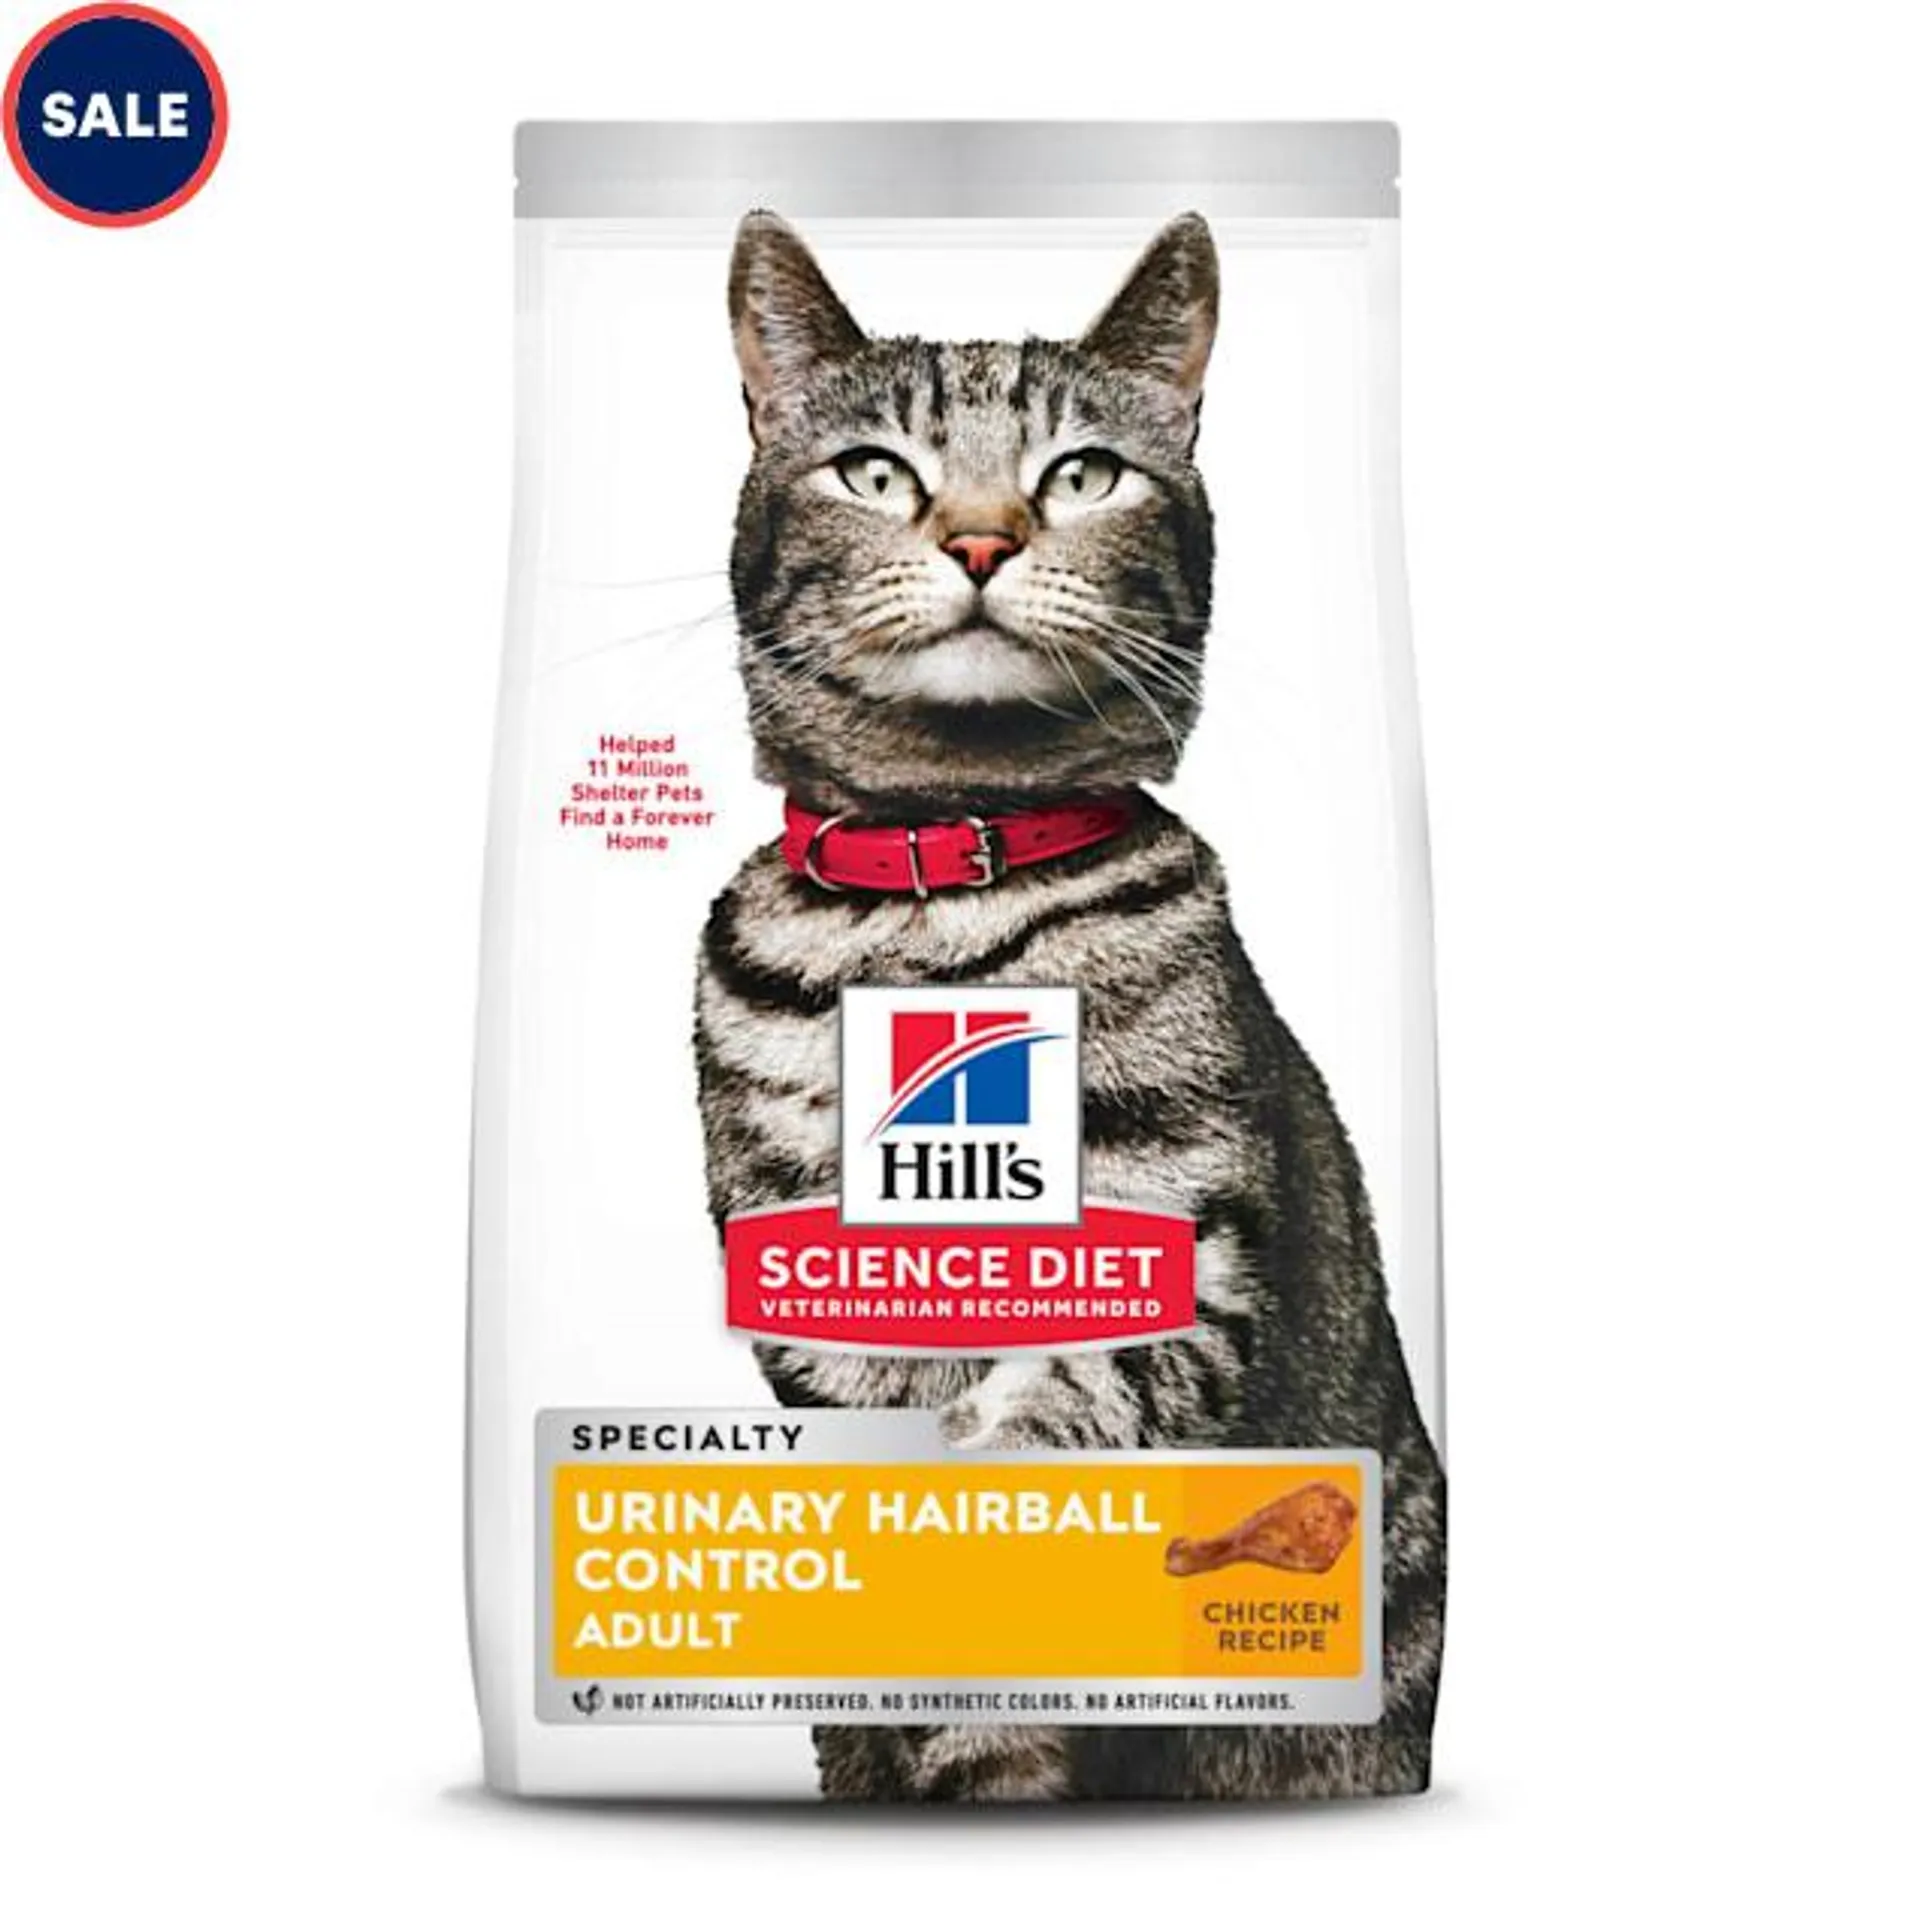 Hill's Science Diet Adult Urinary & Hairball Control Chicken Recipe Dry Cat Food, 15.5 lbs.